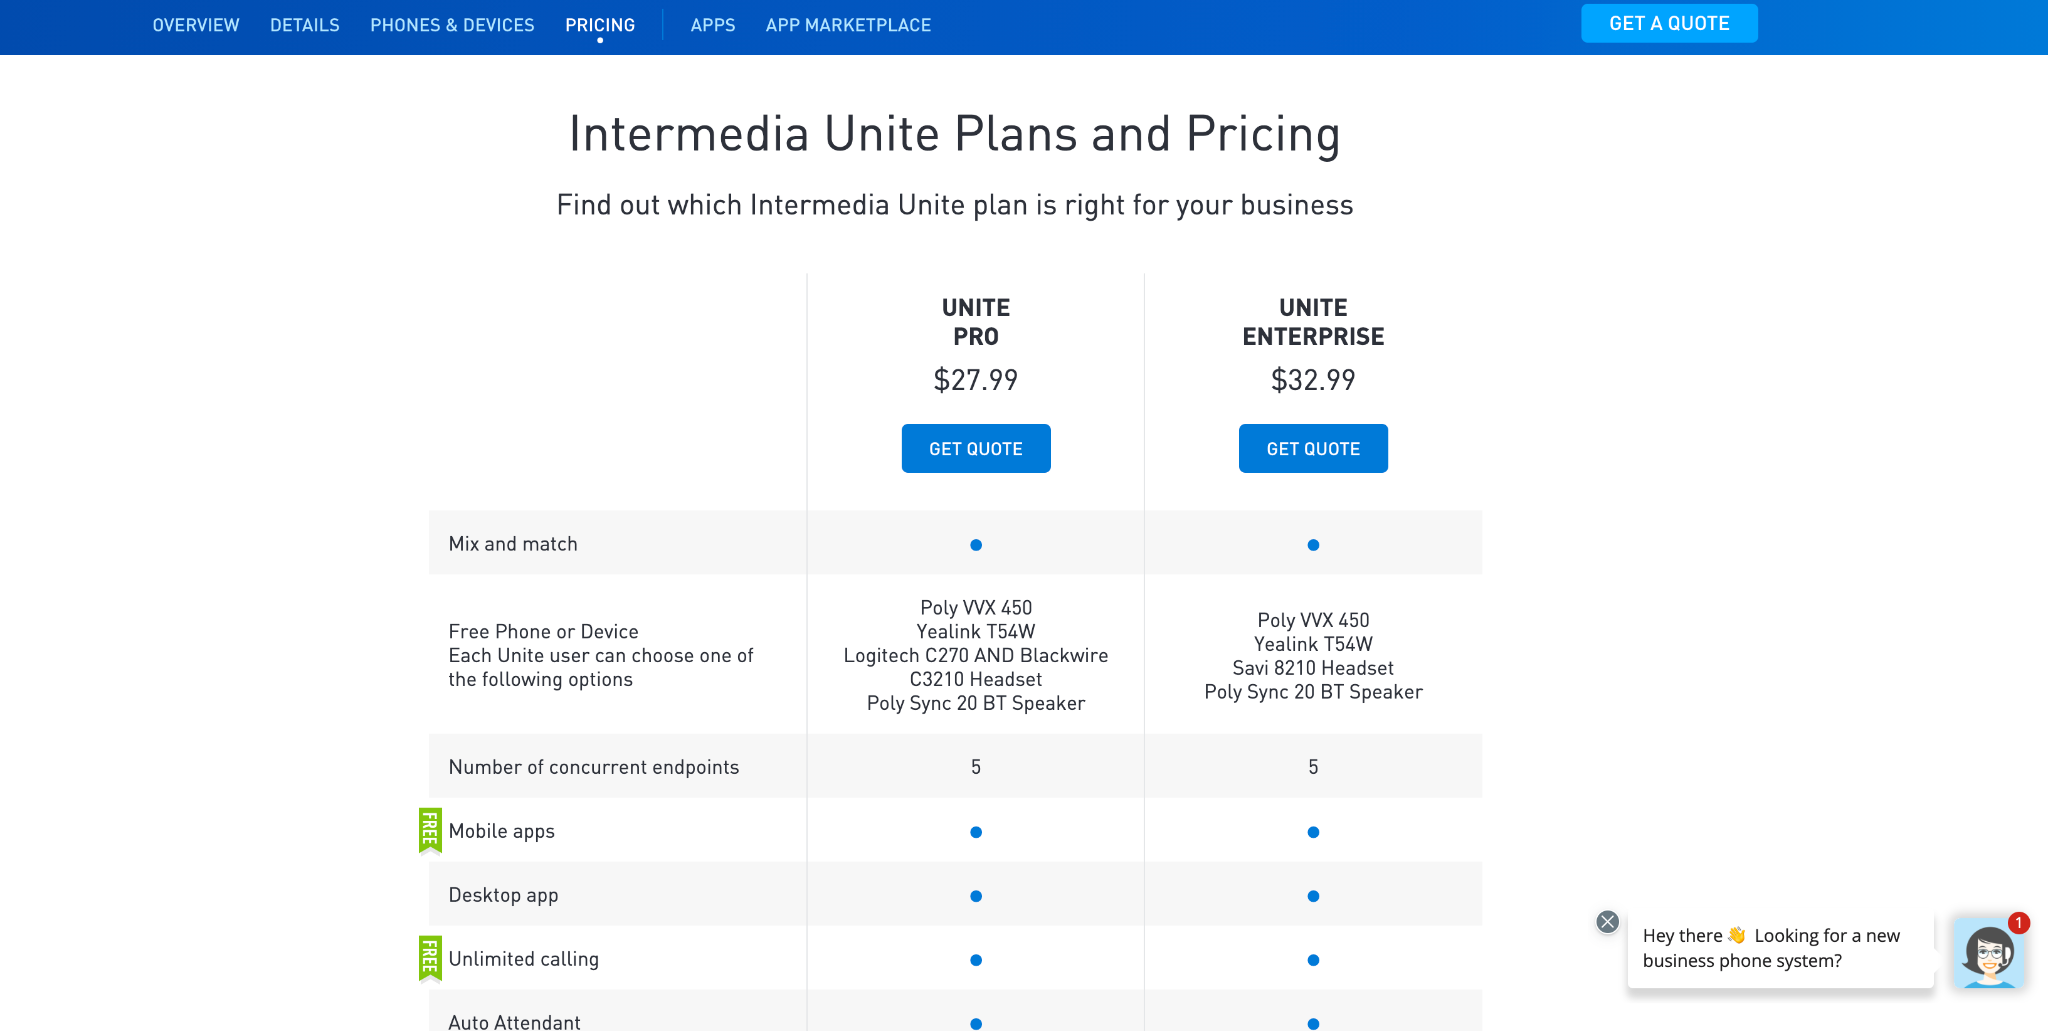 Intermedia Business Phone Services prices